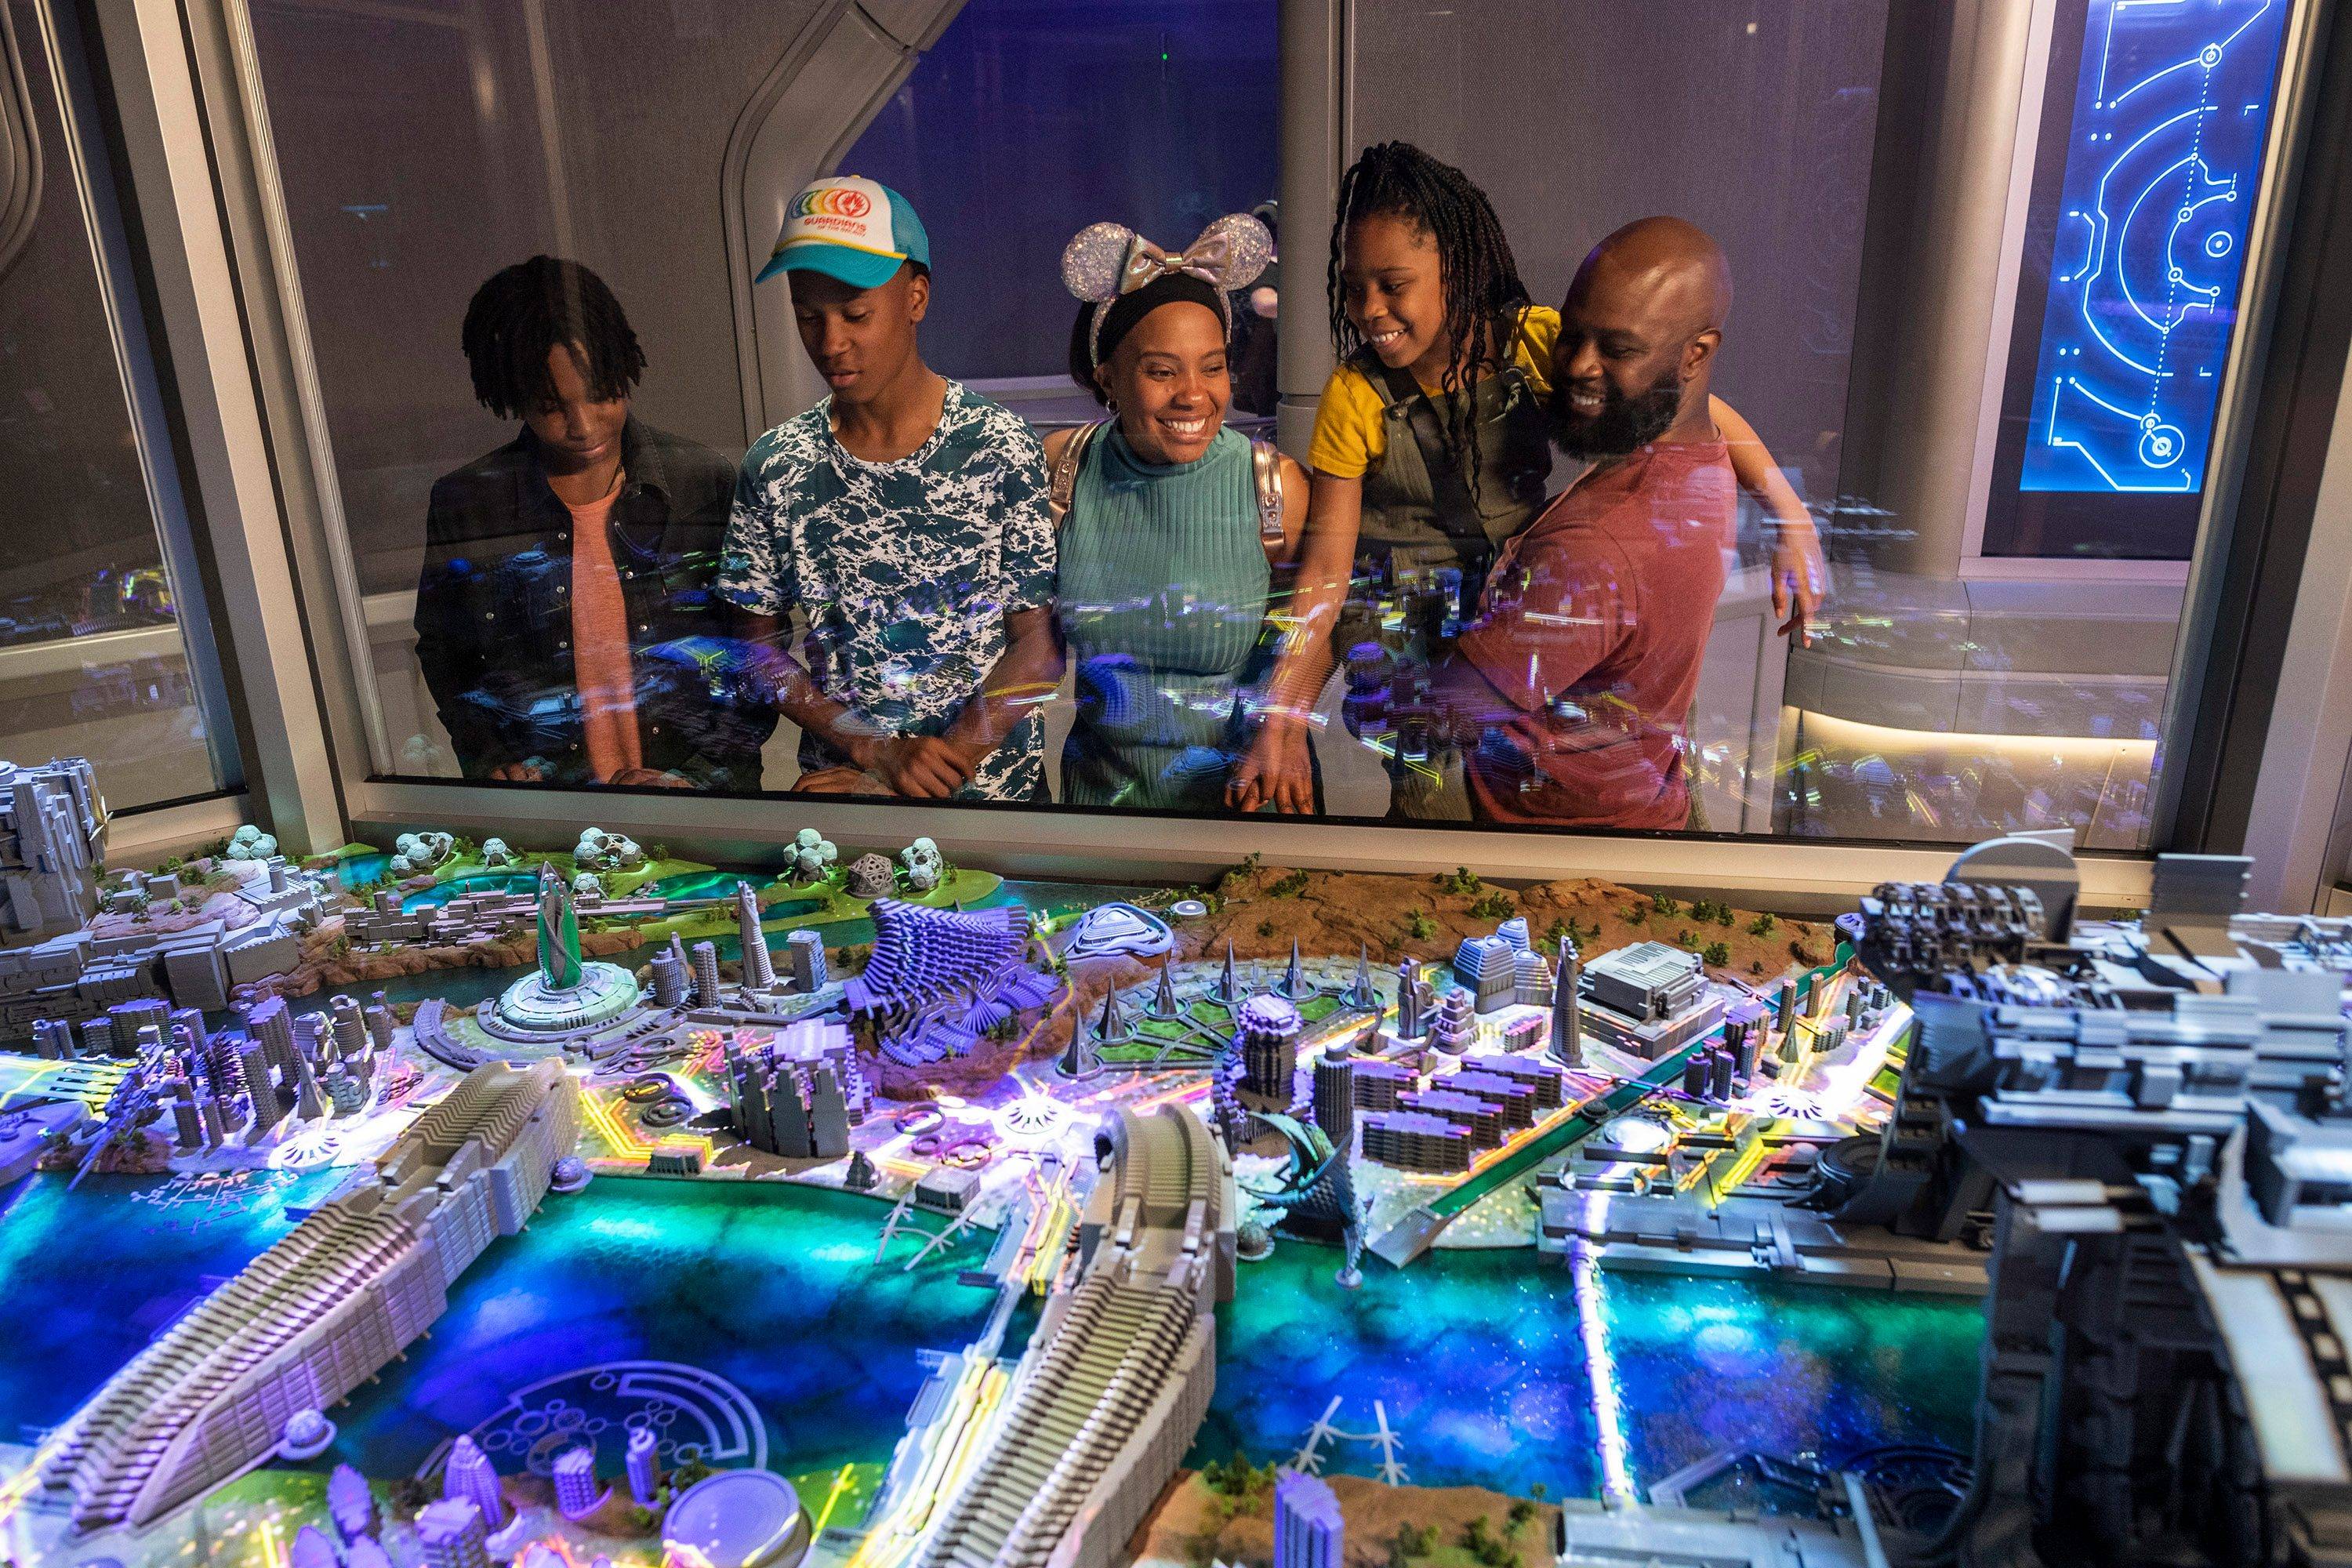 EPCOT guests learn about Xandarian culture in the Xandar Gallery